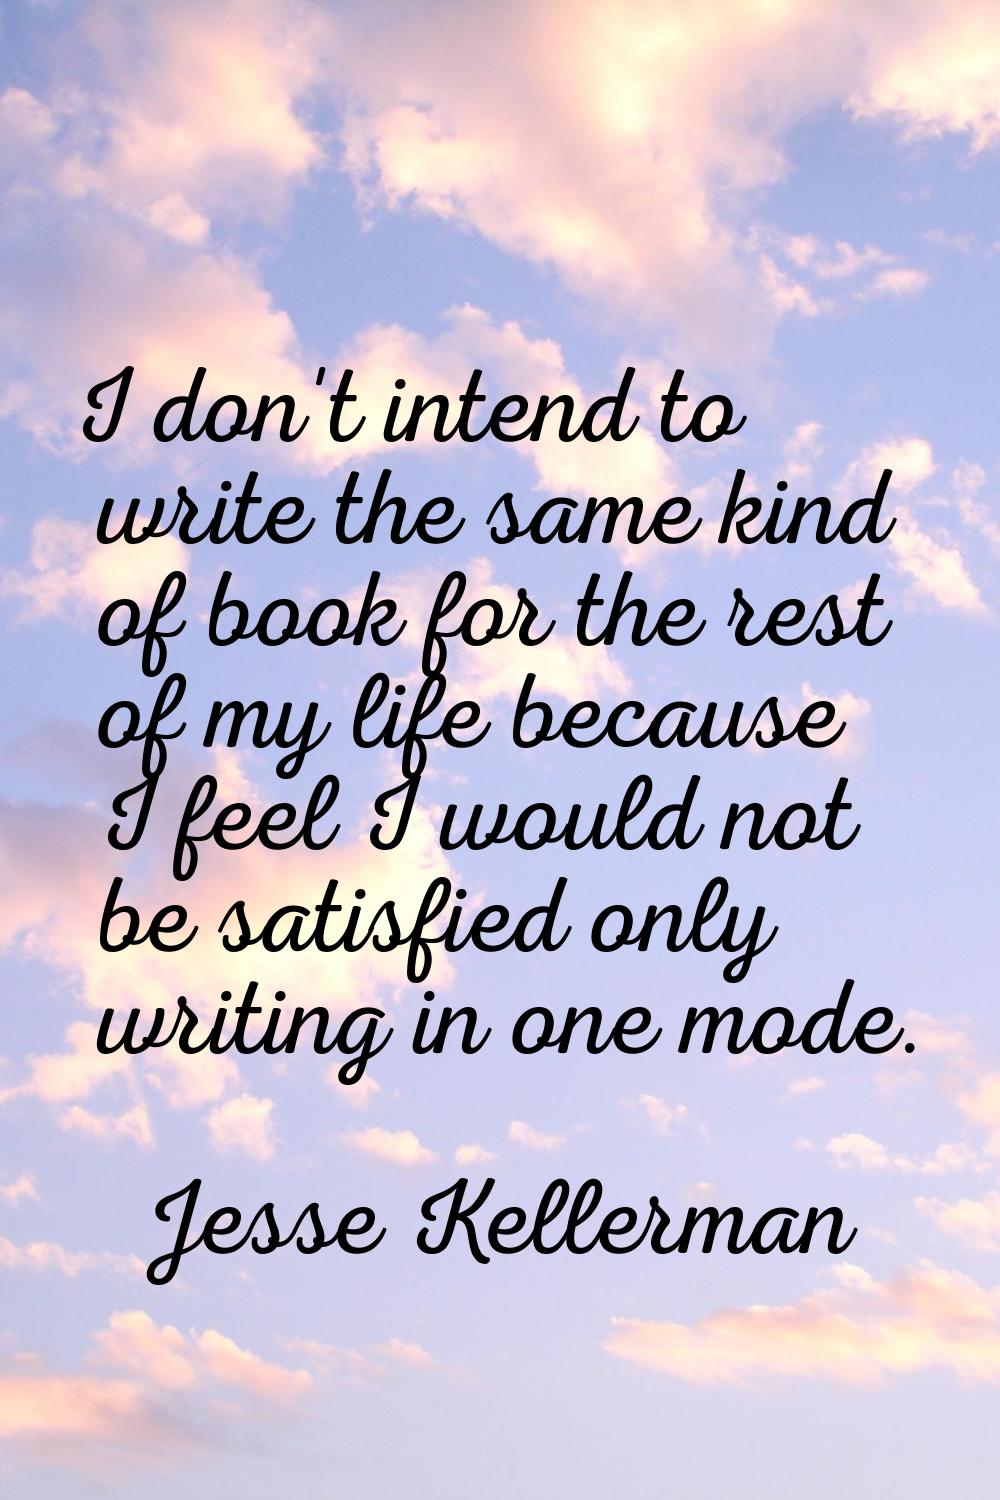 I don't intend to write the same kind of book for the rest of my life because I feel I would not be